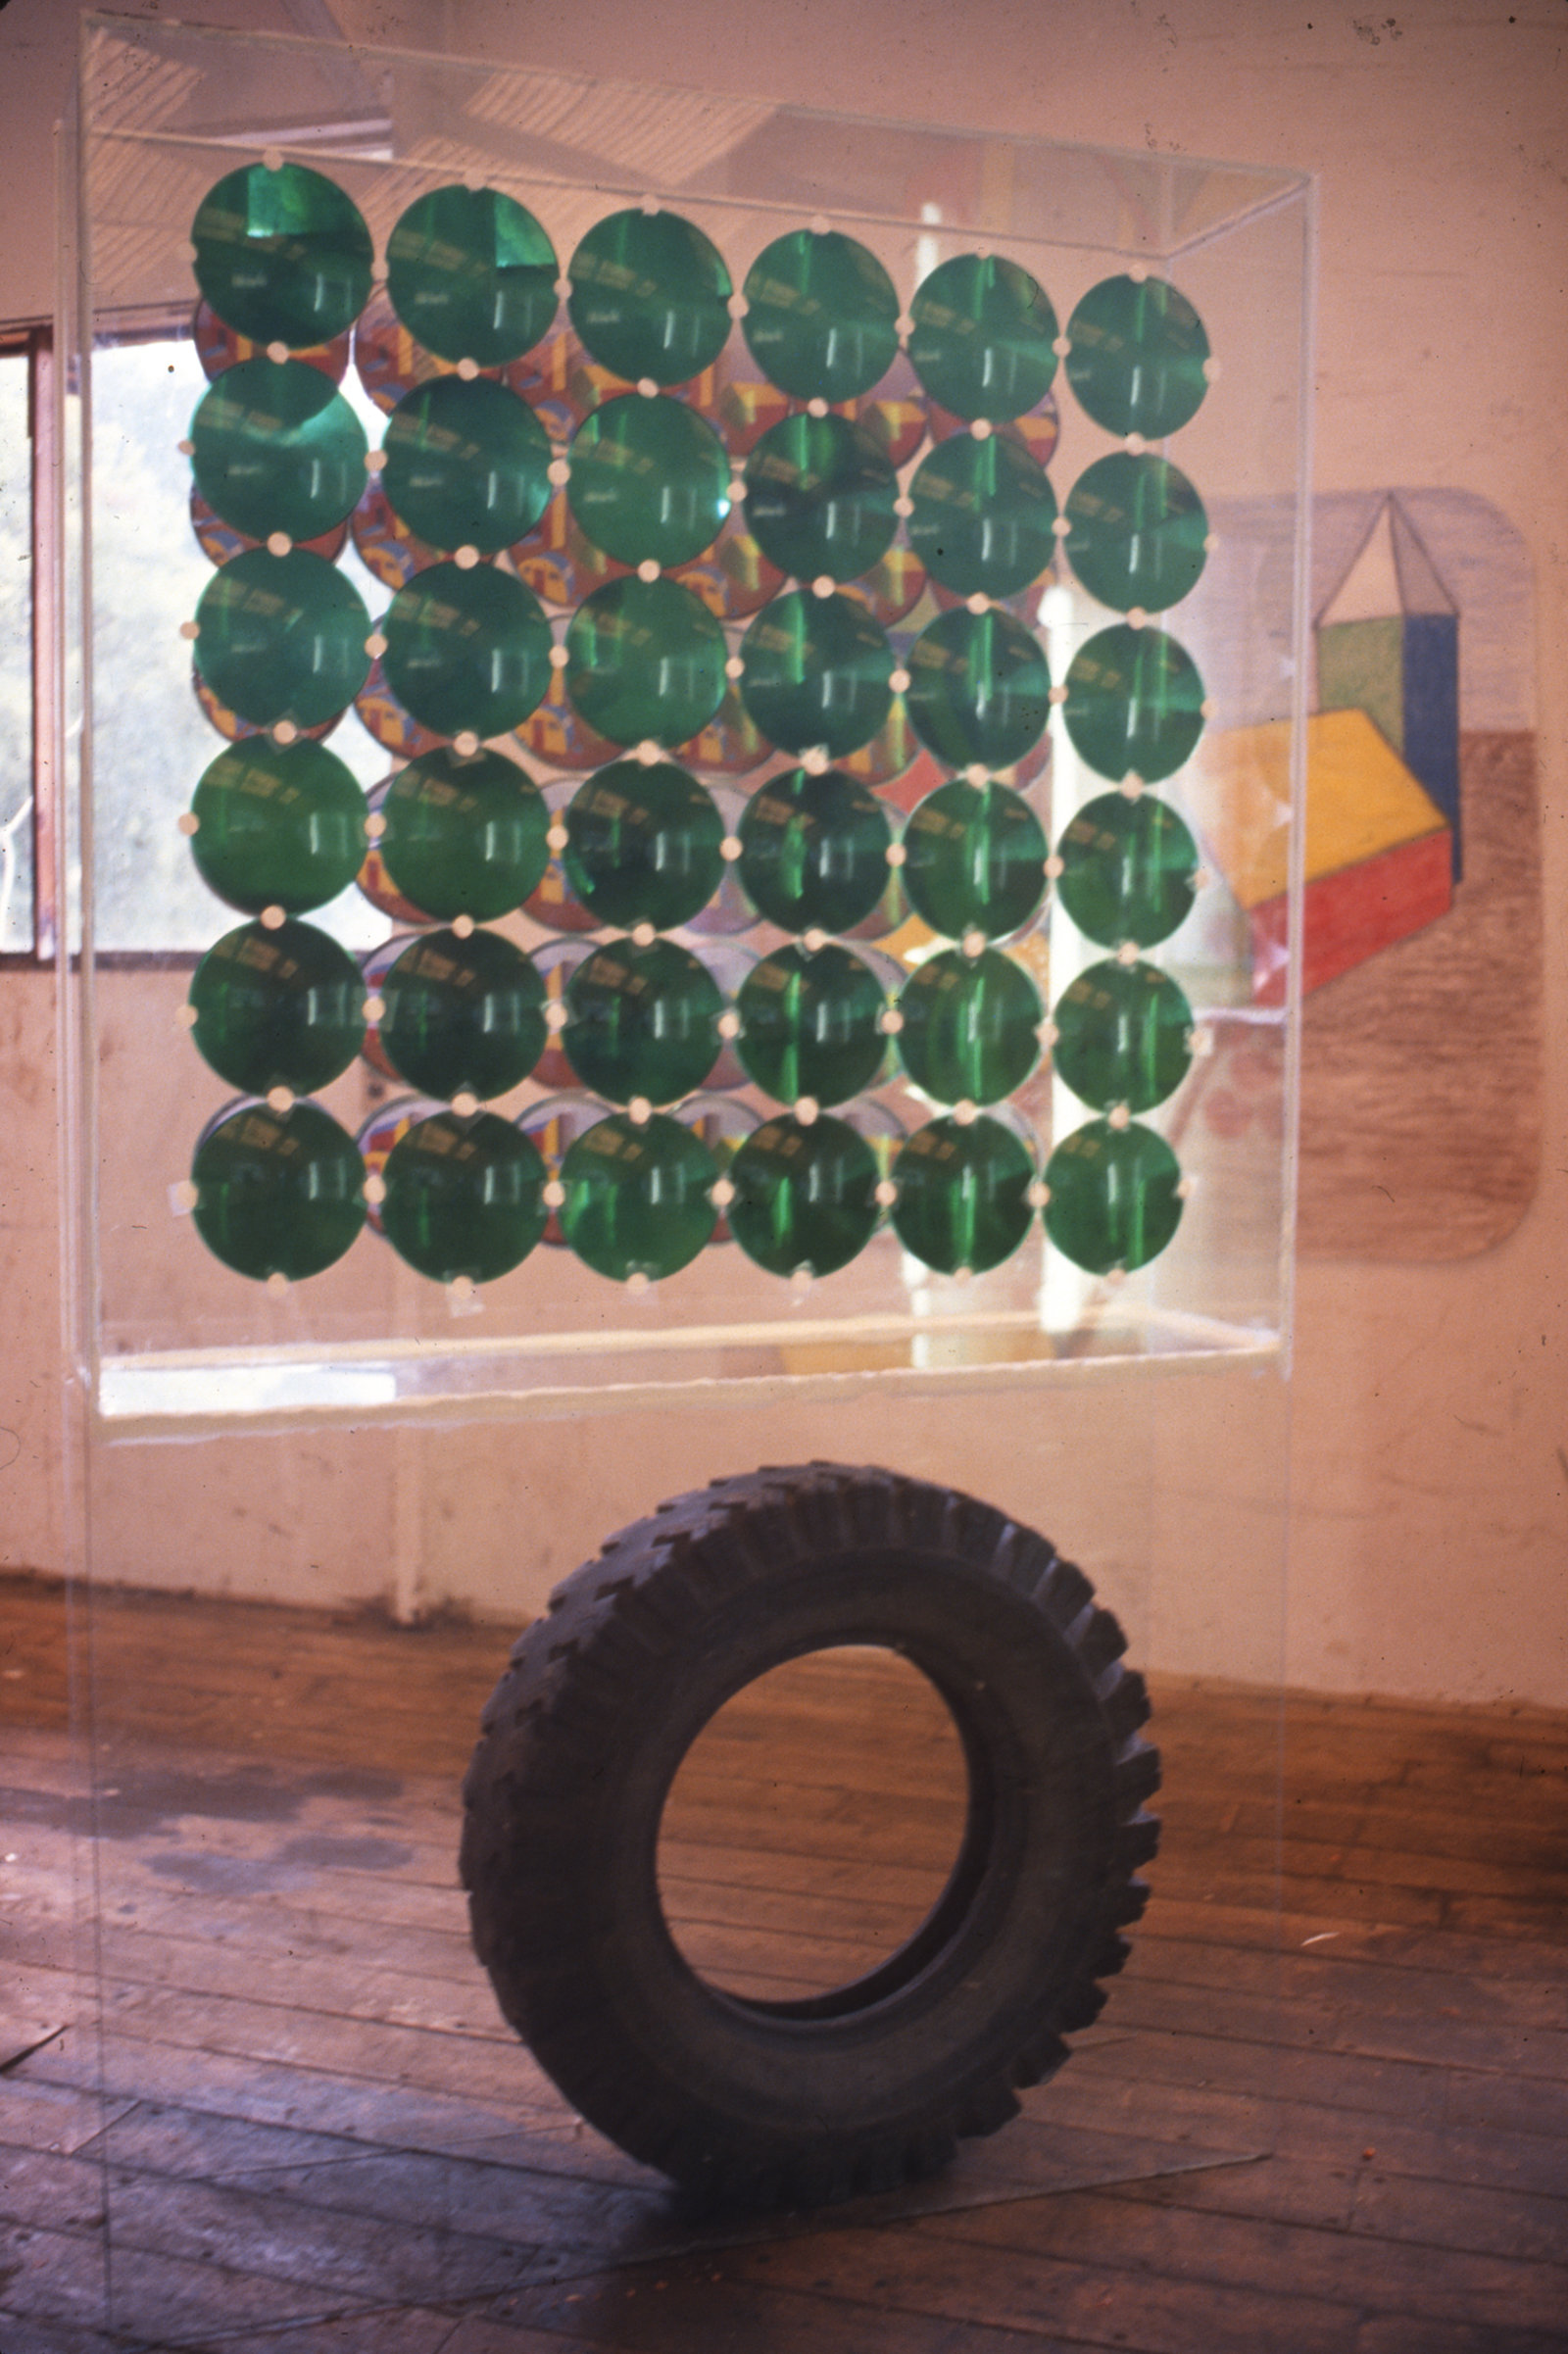 Jerry Pethick, Let Sleeping Dogs Lie—The Dog’s Dream, 1988–1989, cardboard tubes, colour coded drawing, carpet and photo array, dimensions variable